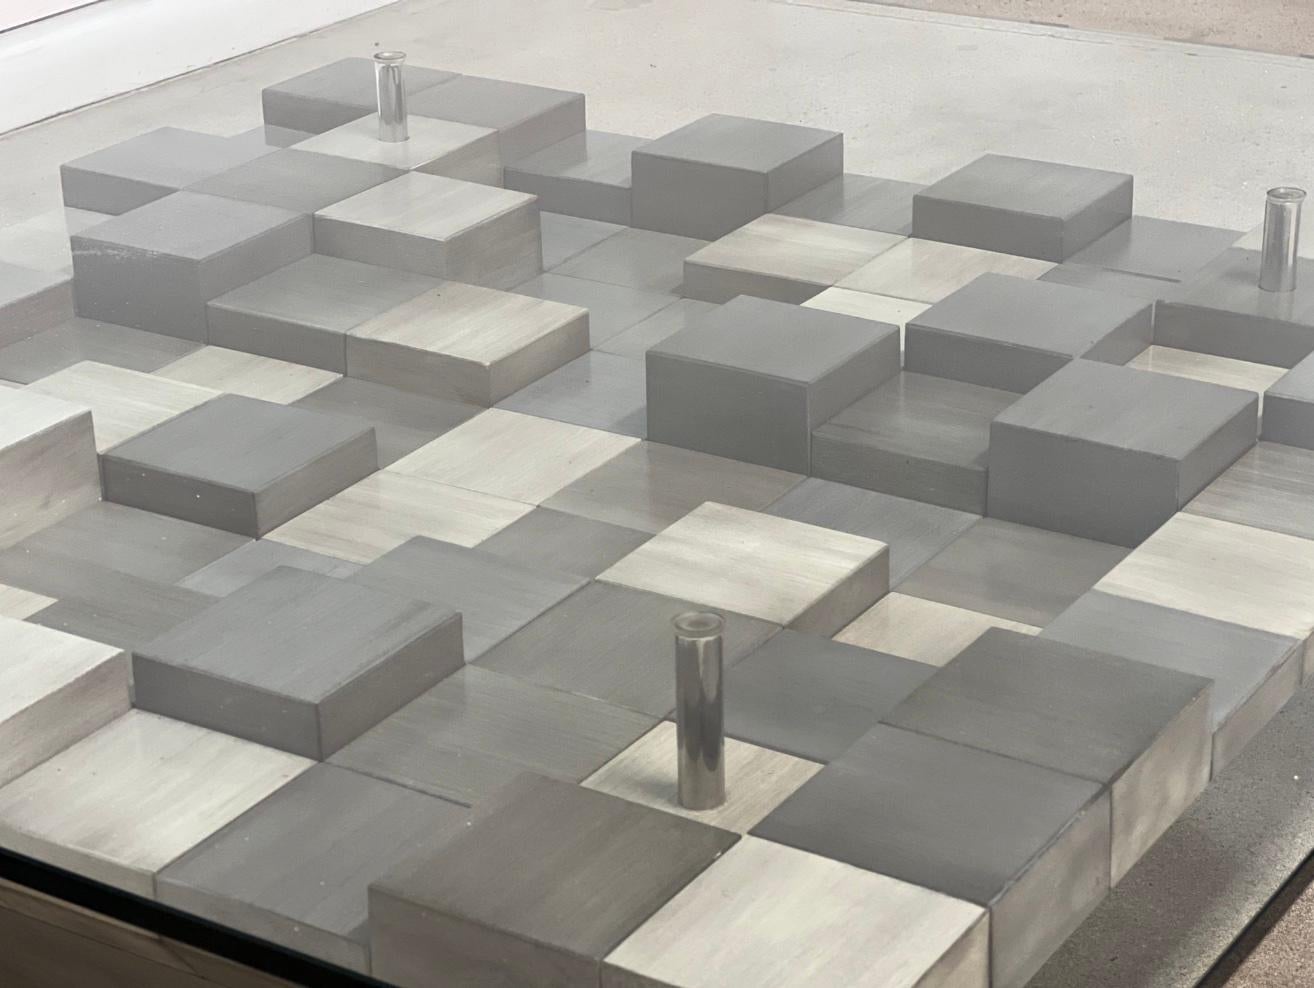 The base of this glass-top table is crafted from an intriguing combination of woods and stainless steel, forming captivating geometric shapes. This unconventional design adds a distinctiveness to the piece, making it truly remarkable. The use of